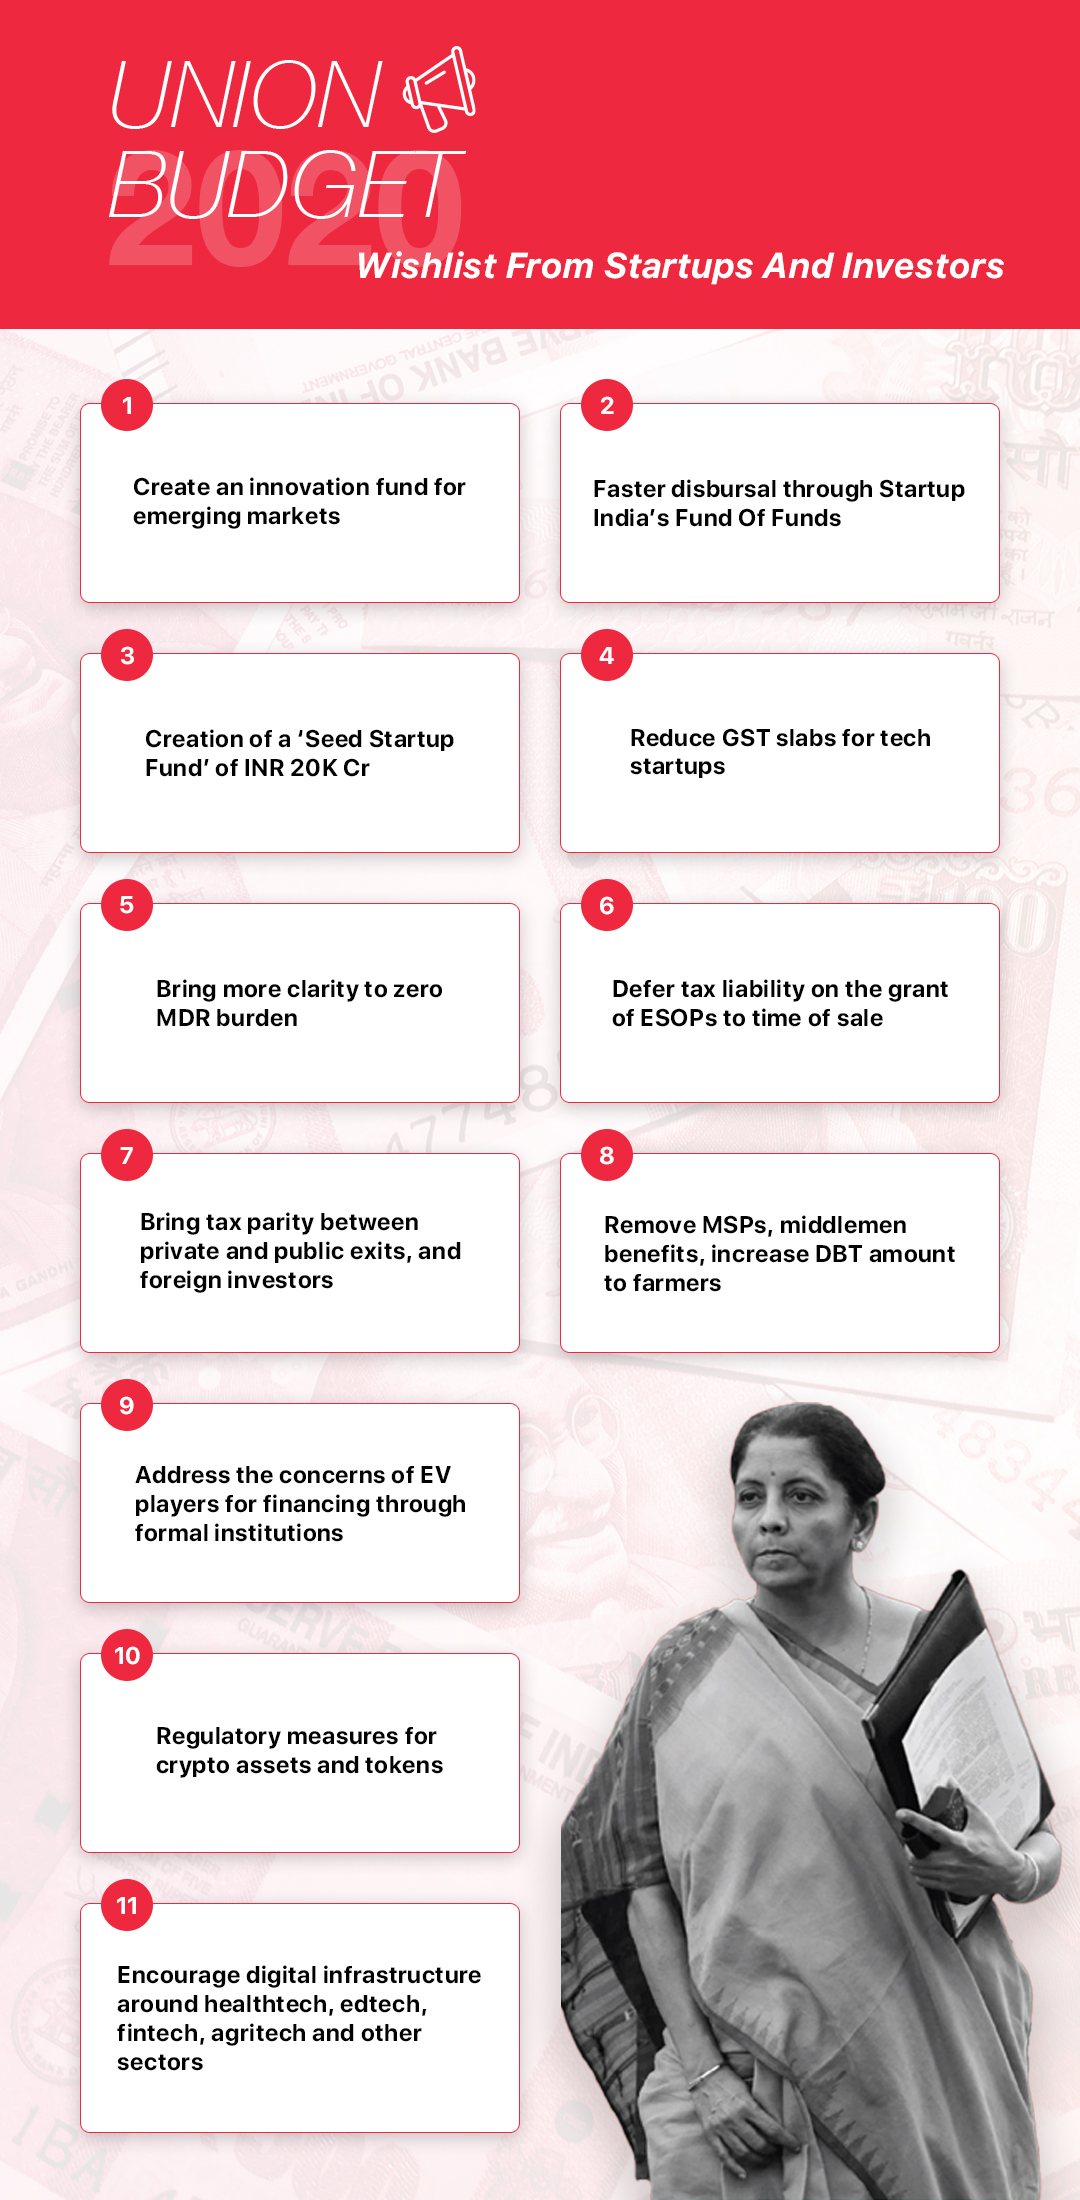 Will finance minister Nirmala Sitharaman's Unione Budget 2020 live up to the expectations of the startup ecosystem and India Inc? 